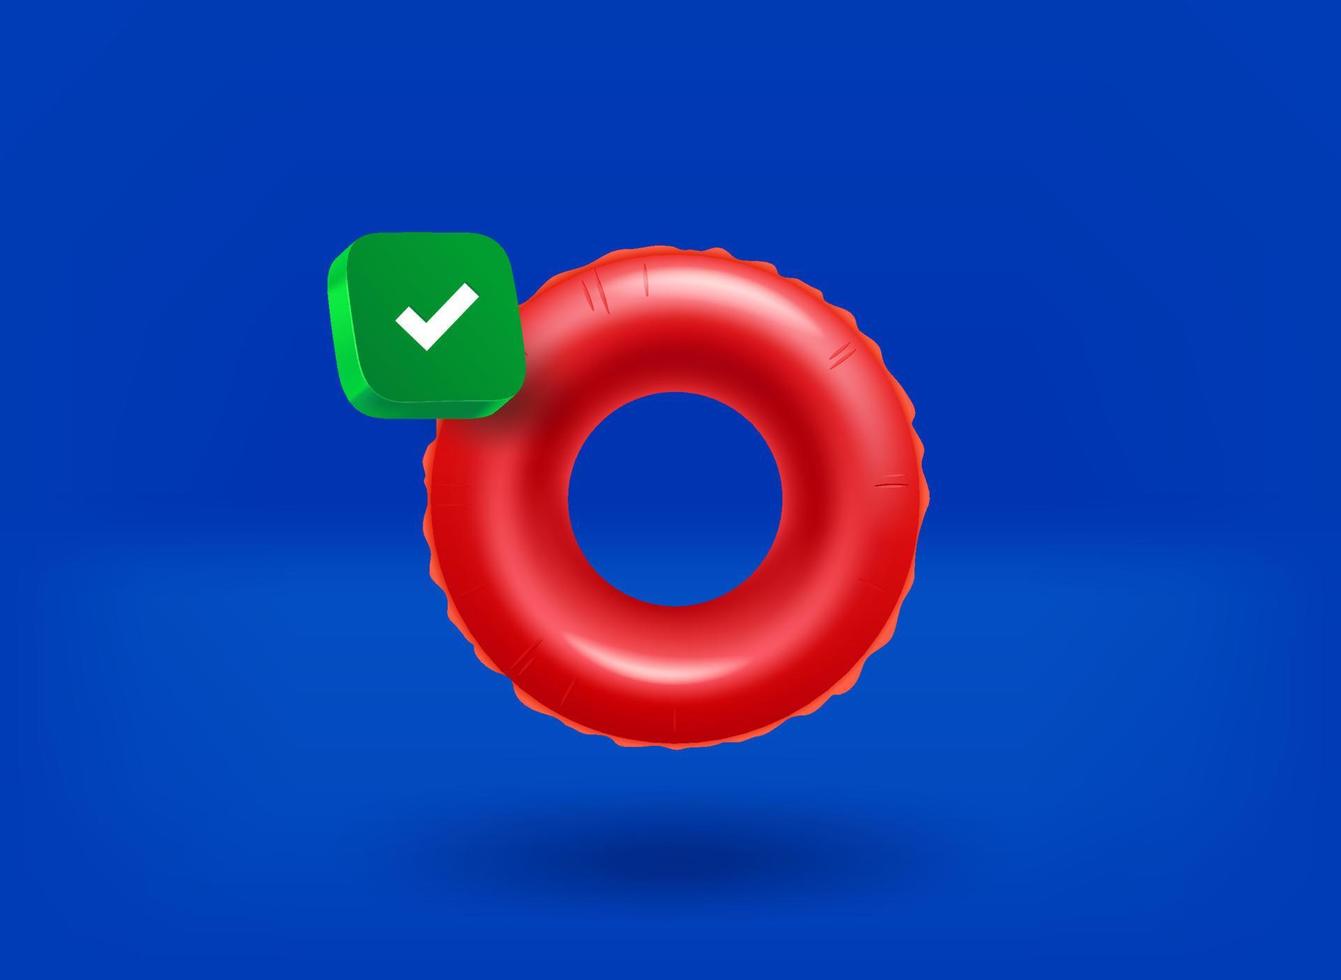 Red floater with checkmark icon. 3d vector illustration